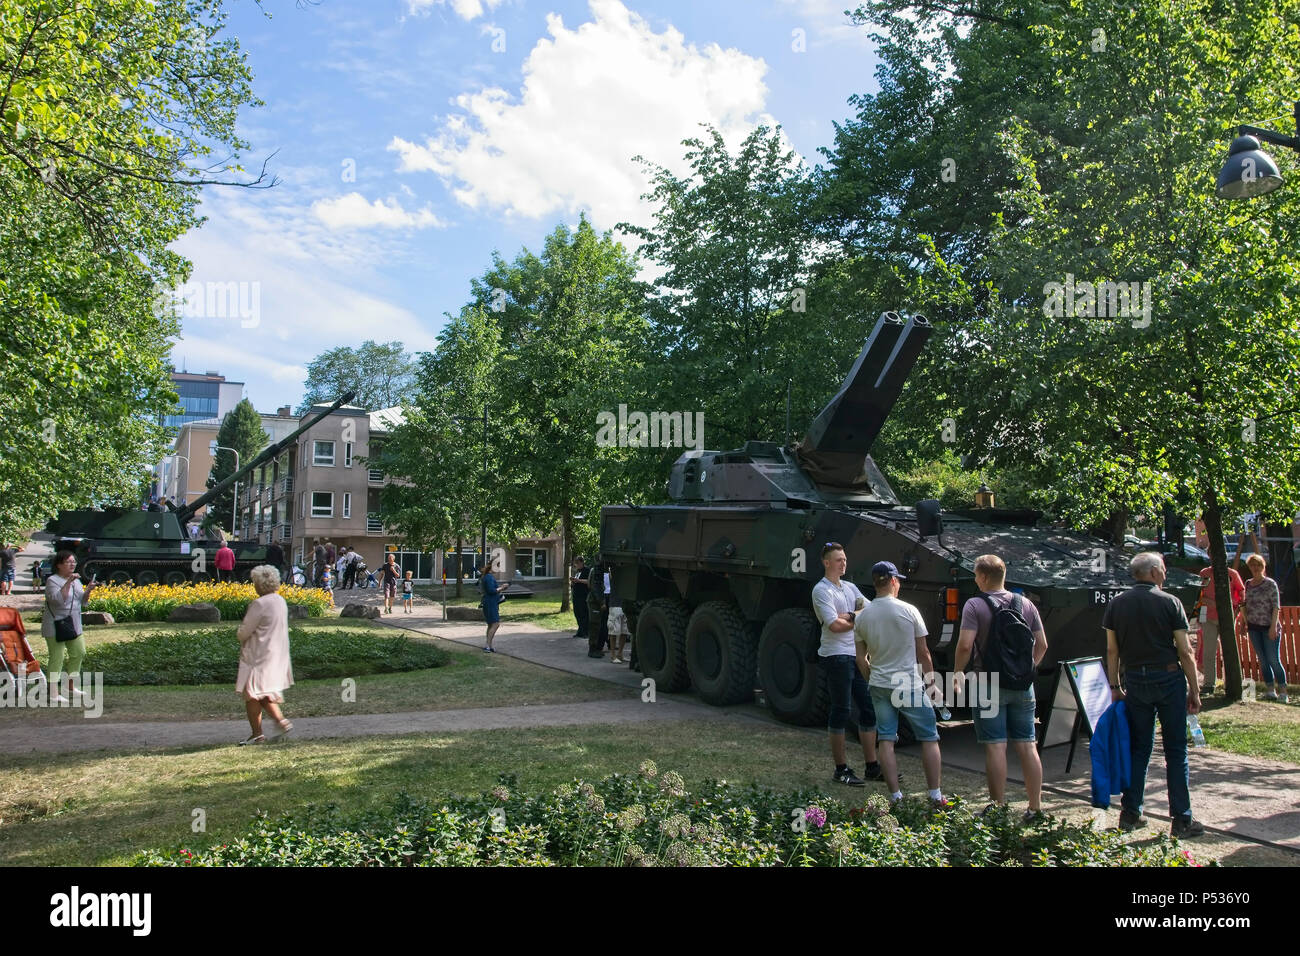 Finnish Defence Forces artillery on display, Lappeenranta Finland Stock Photo